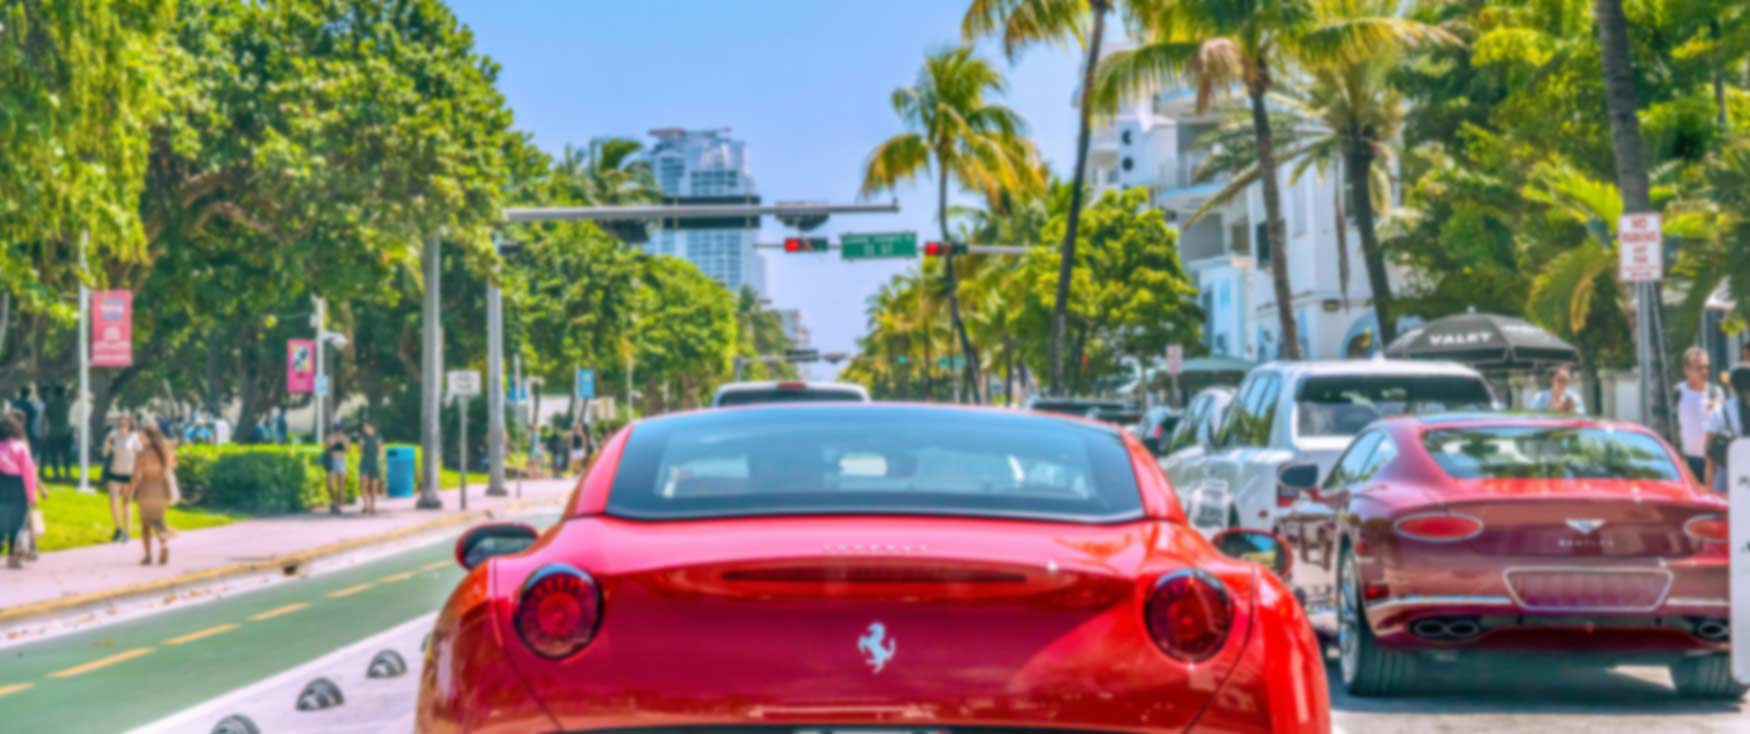 Drive More for Less: Discover the Cheapest Car Rentals in SWFL.